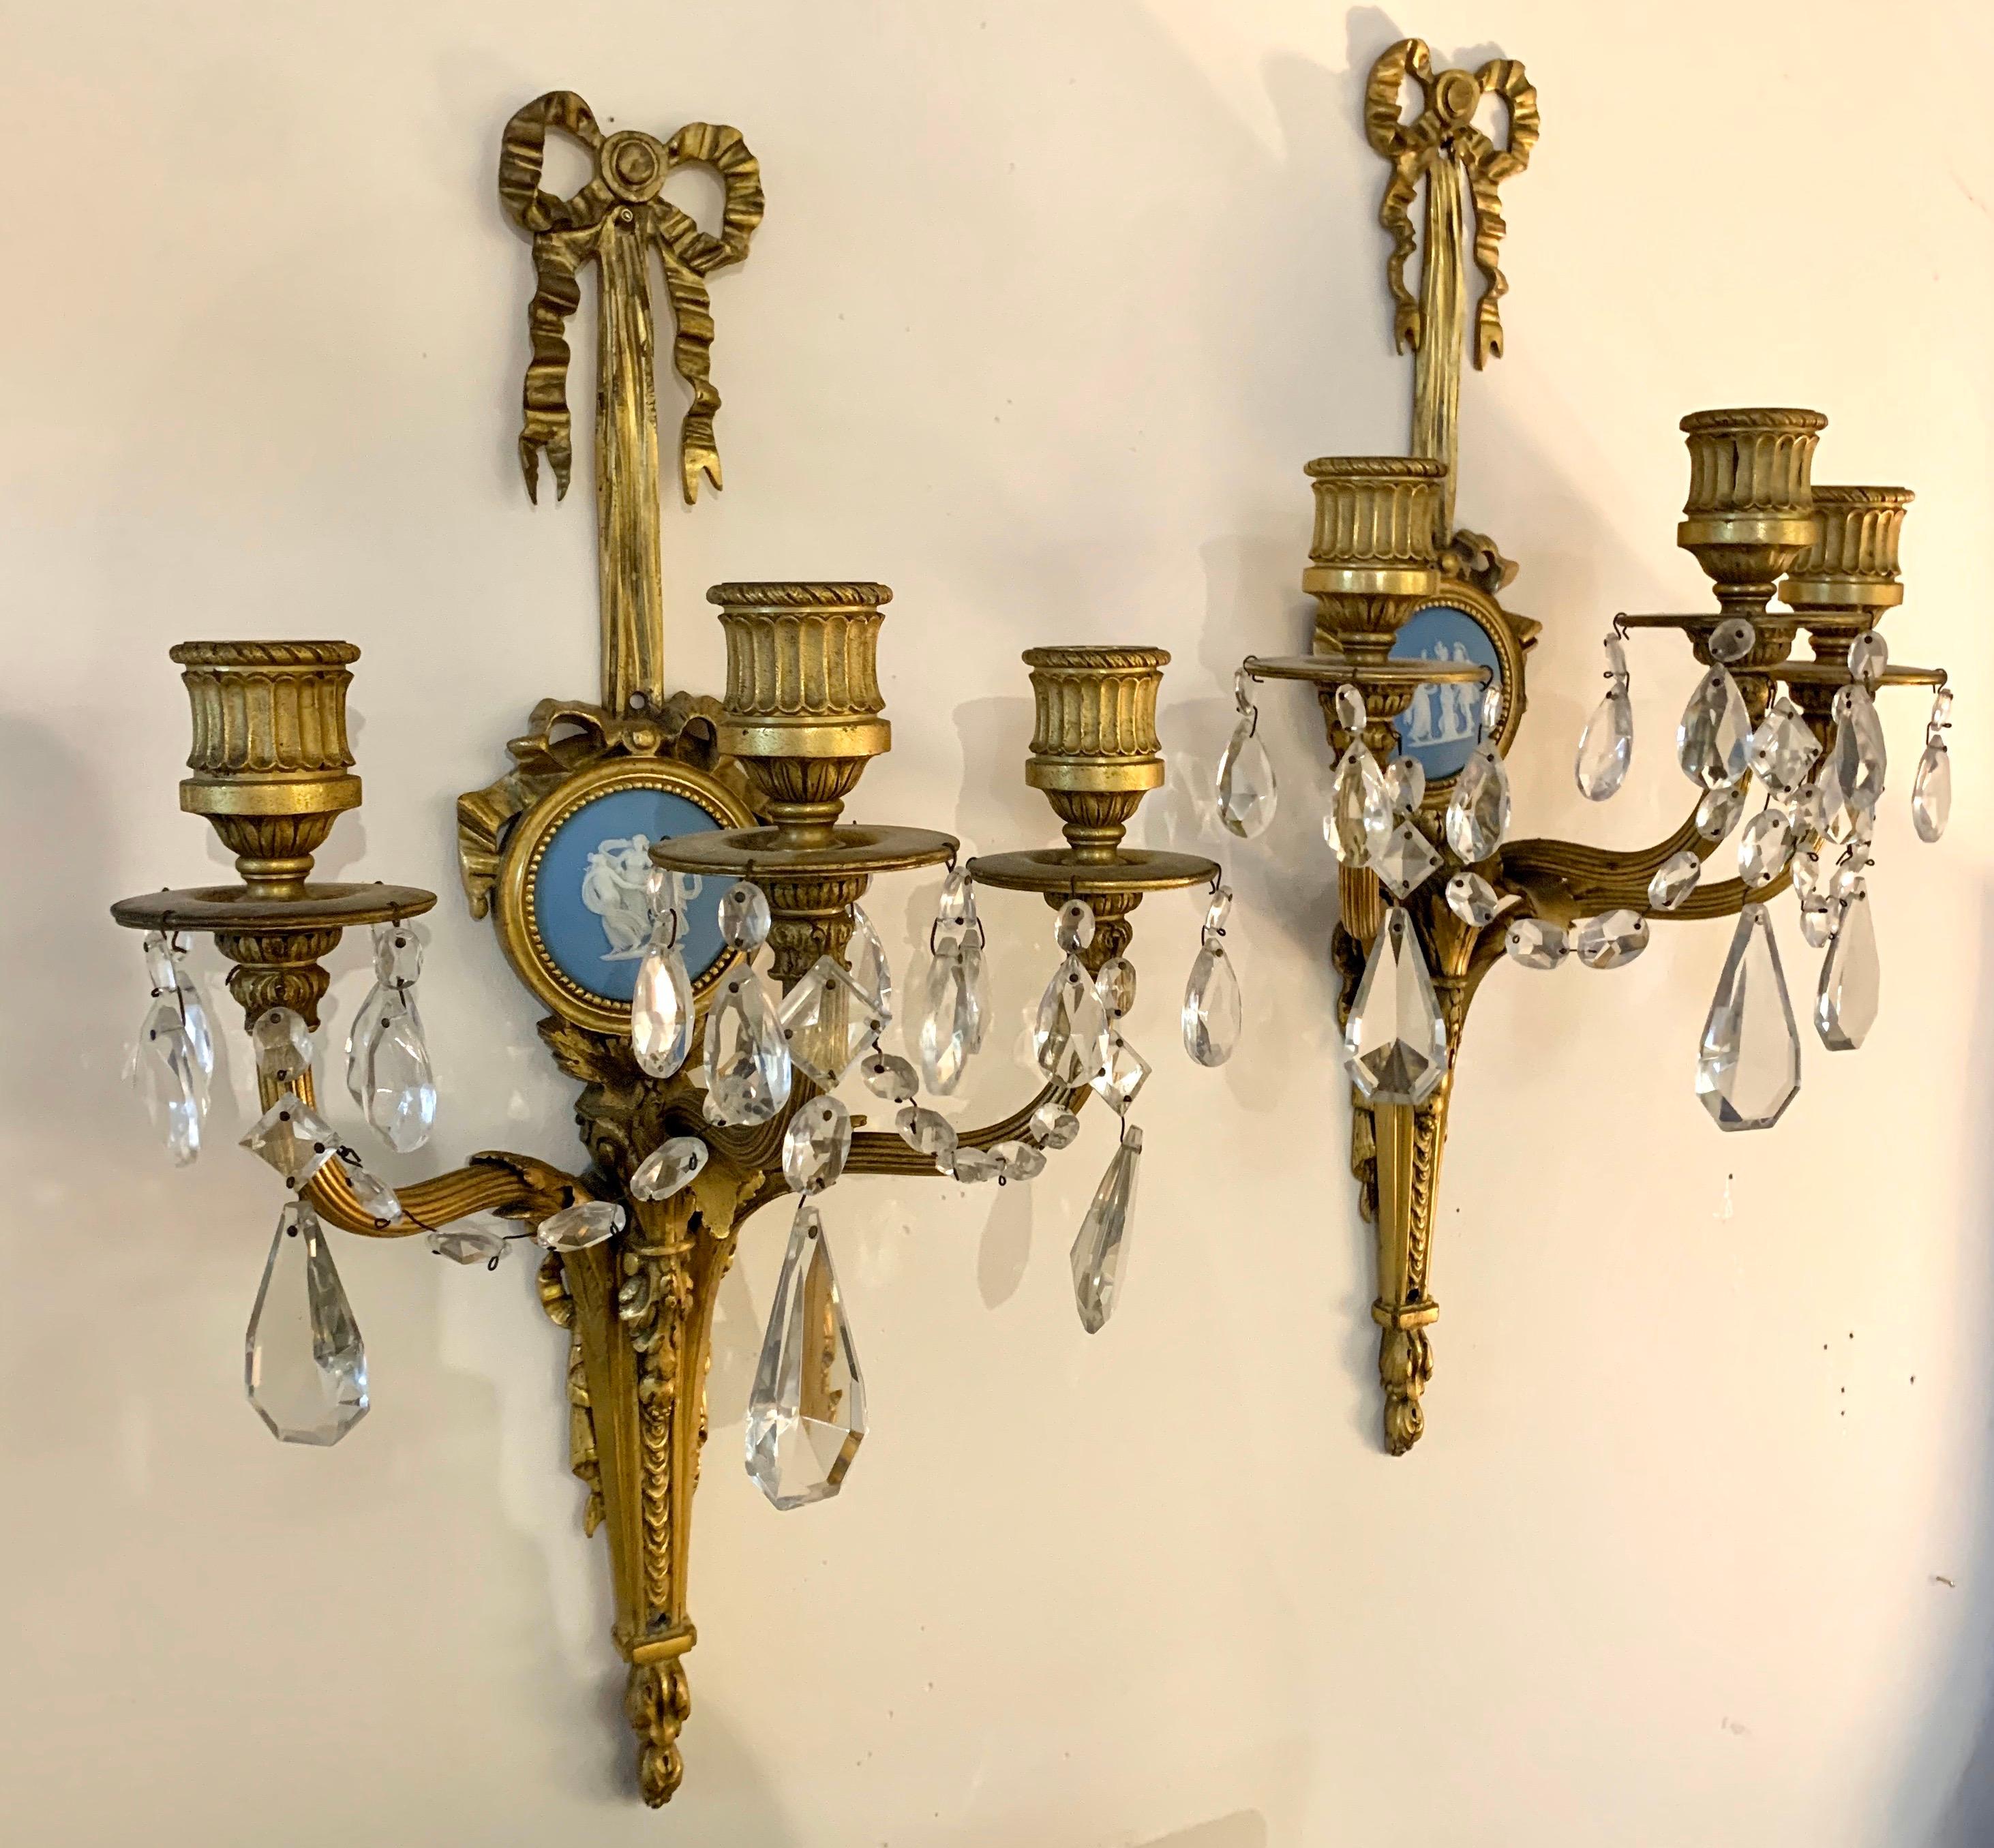 A magnificent pair of antique Louis XVI style doré bronze and Wedgwood mounted three arm candle sconces/wall appliques signed by E. F. Caldwell & Co New York. The Caldwell monogram is prominent on the back. Each sconce has been hand chiseled and